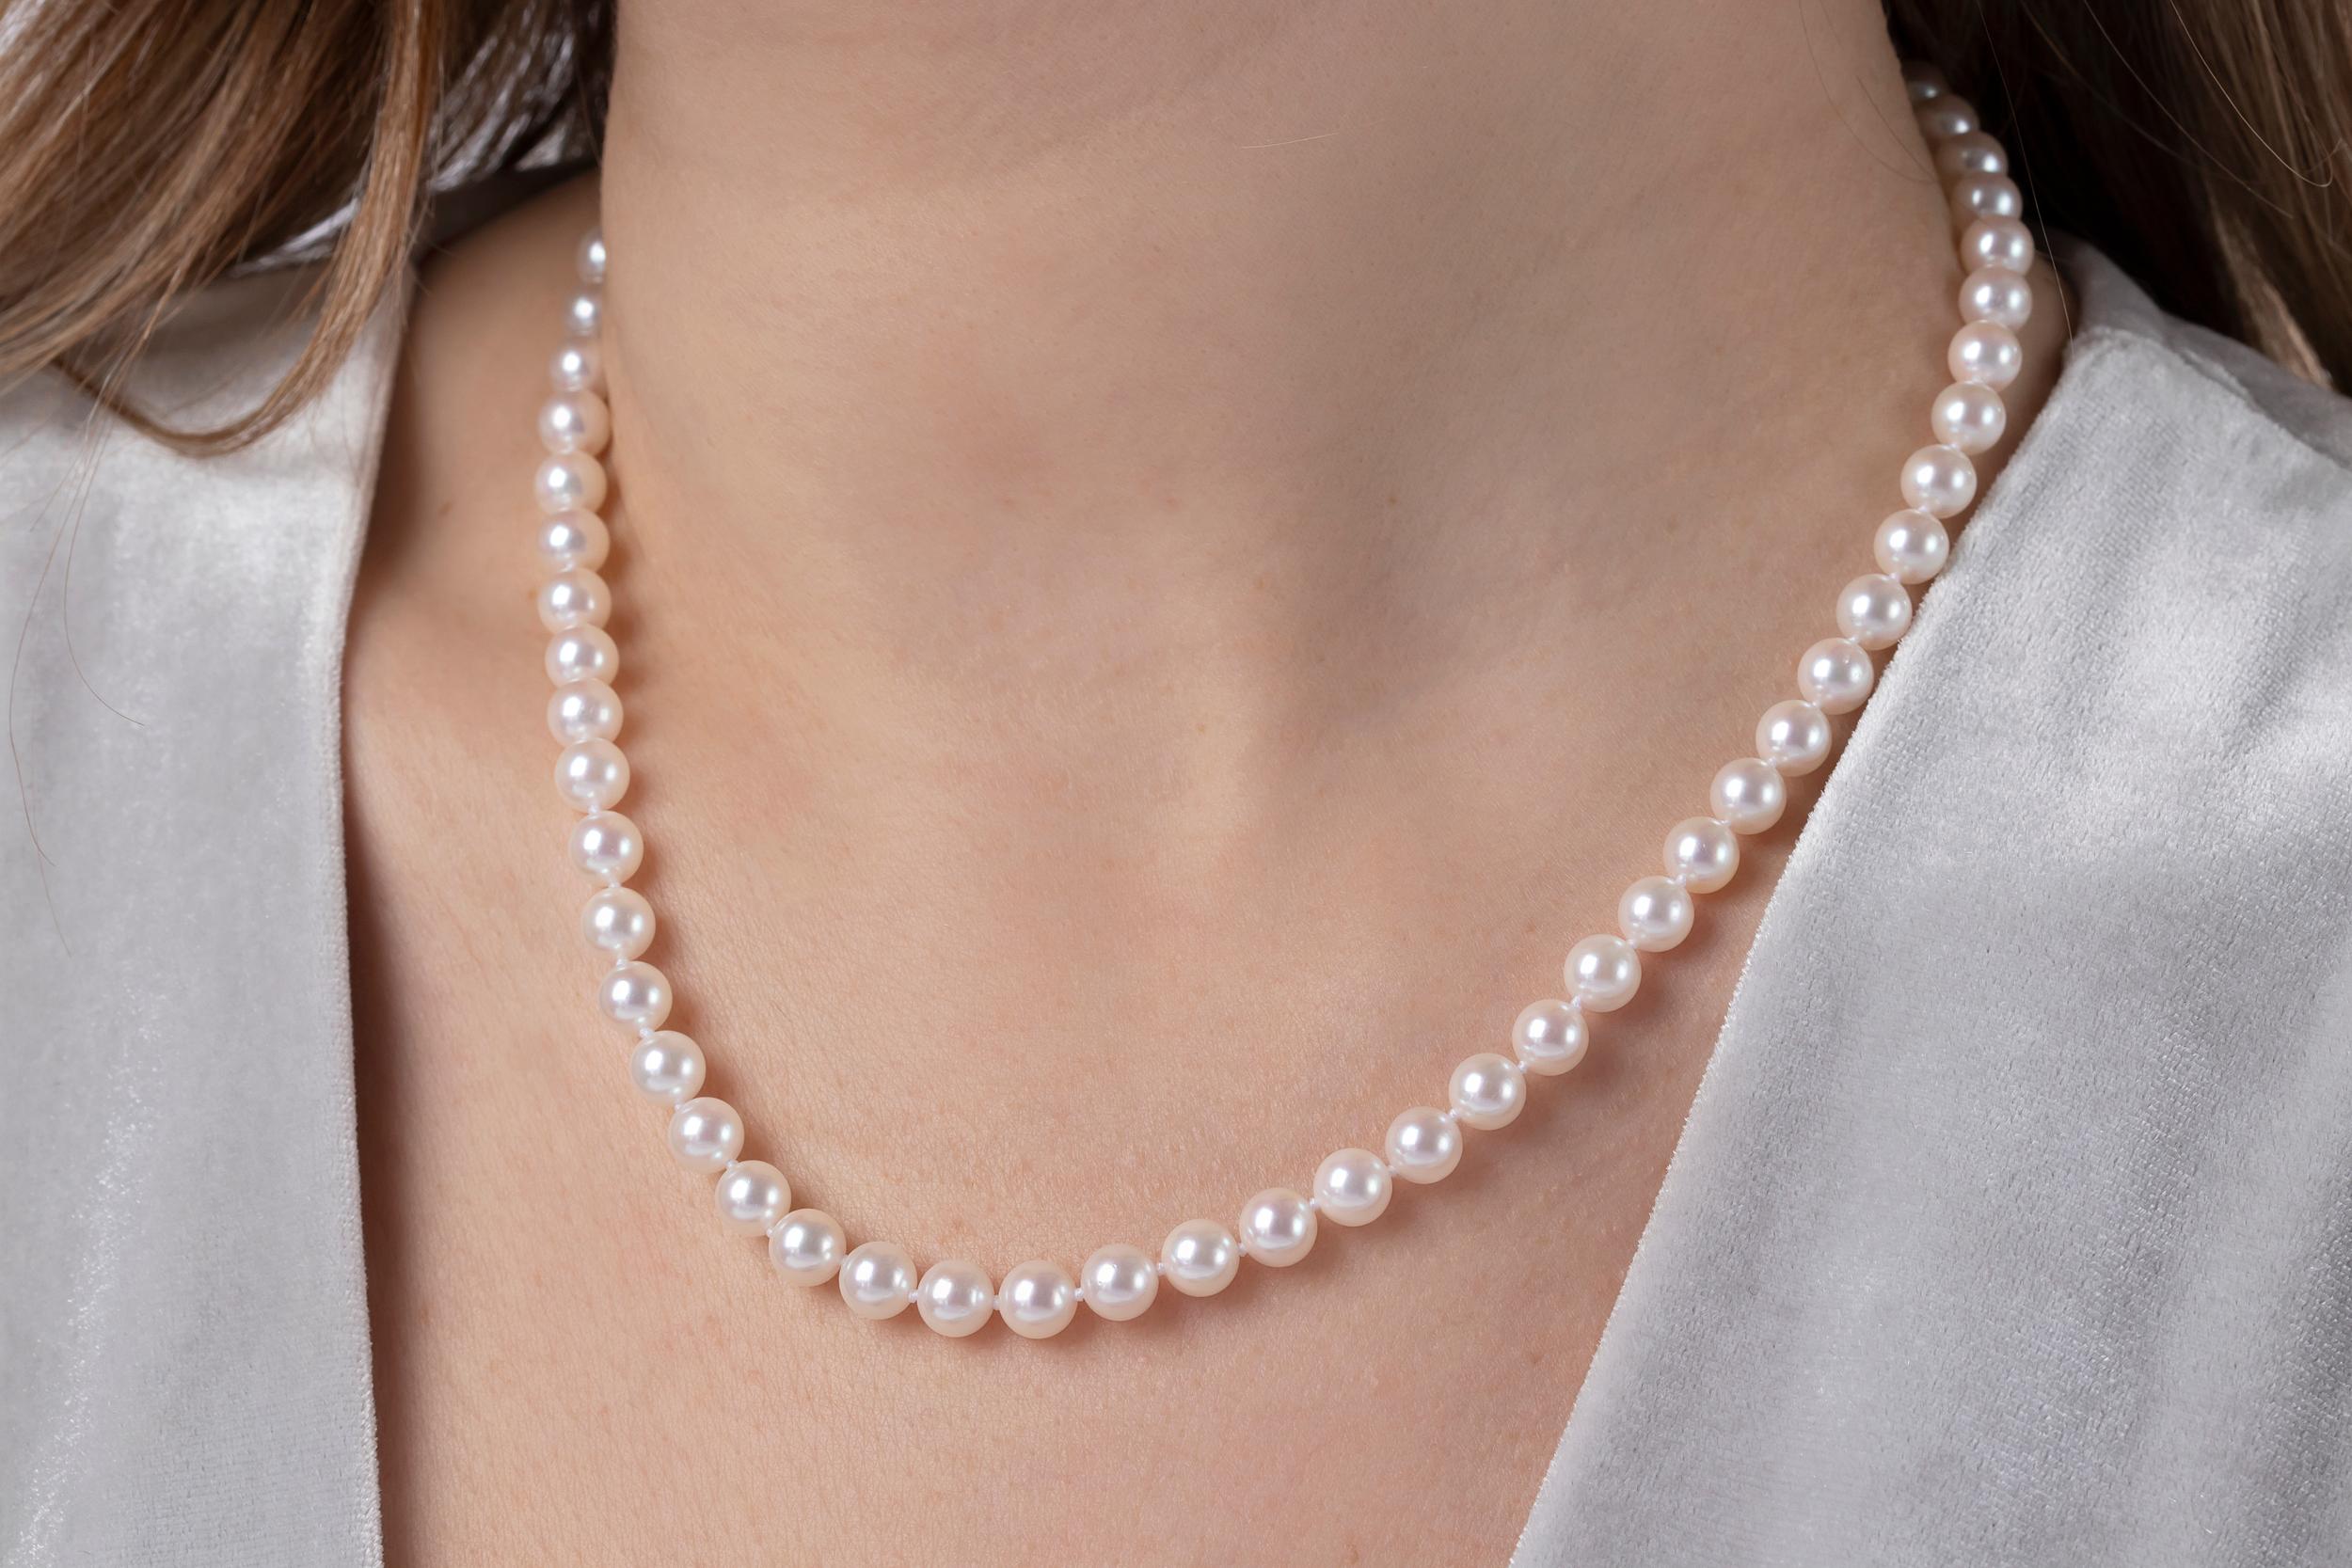 This timeless necklace by Yoko London features premium 6-6.5mm Japanese Akoya pearls, finished with a simple 18K yellow gold clasp. Crafted in our London atelier by the world’s leading pearl specialists, this classic necklace is a must have for any